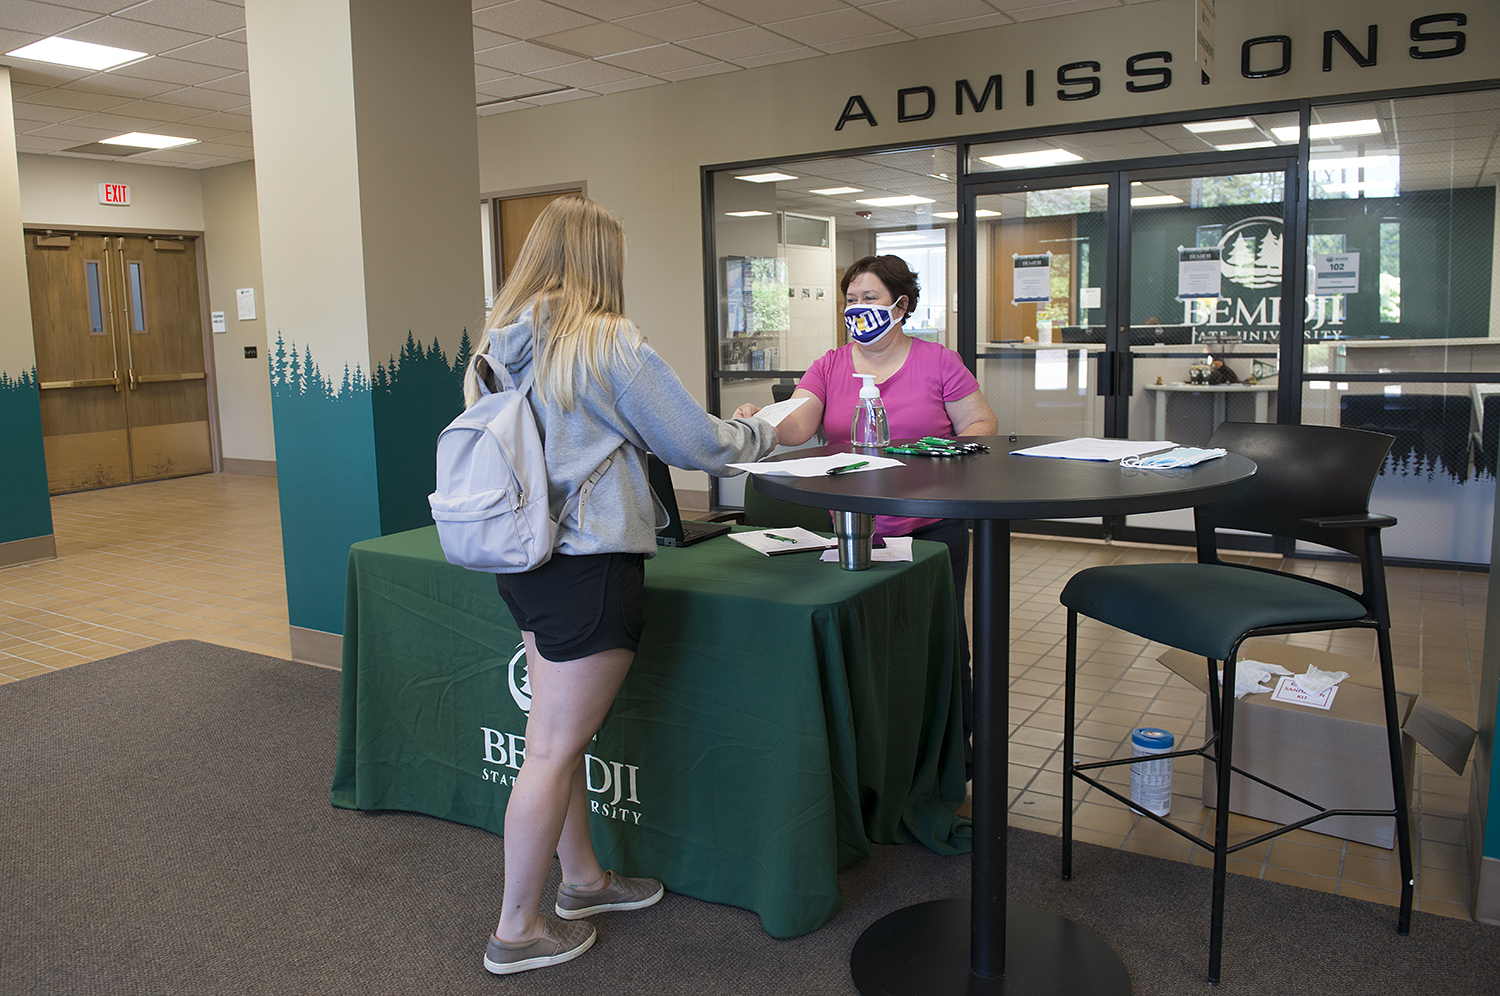 Gina Walkup from the BSU business office staffs the welcome table inside Deputy Hall, to ensure visitors complied with mask-usage guidelines and were completing the required online health screening survey. The station was open during the first few weeks of the Fall 2020 semester.